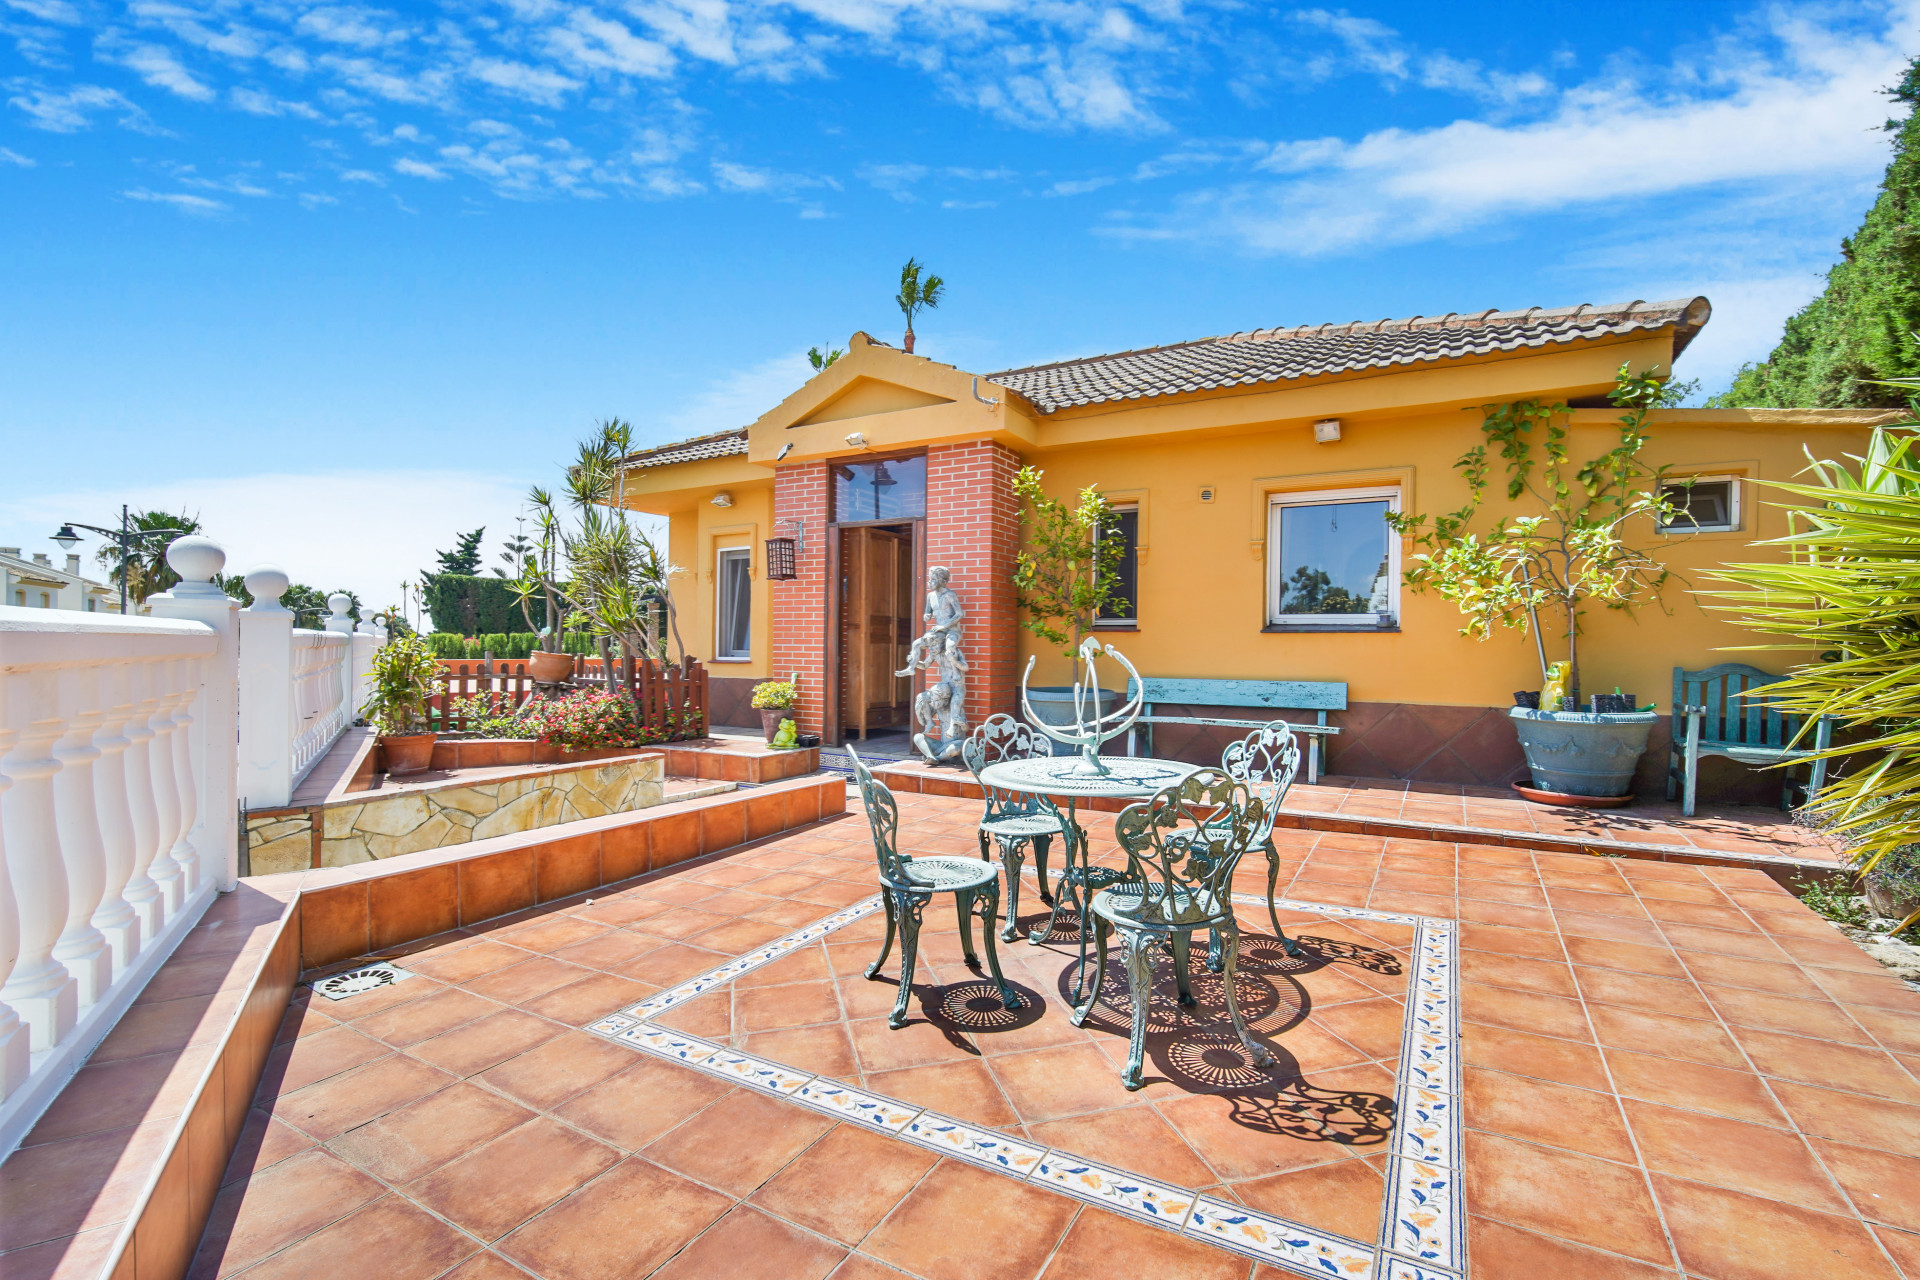 Charming three bedroom villa in a prime location of Calahonda; walking distance to all amenities and the beach